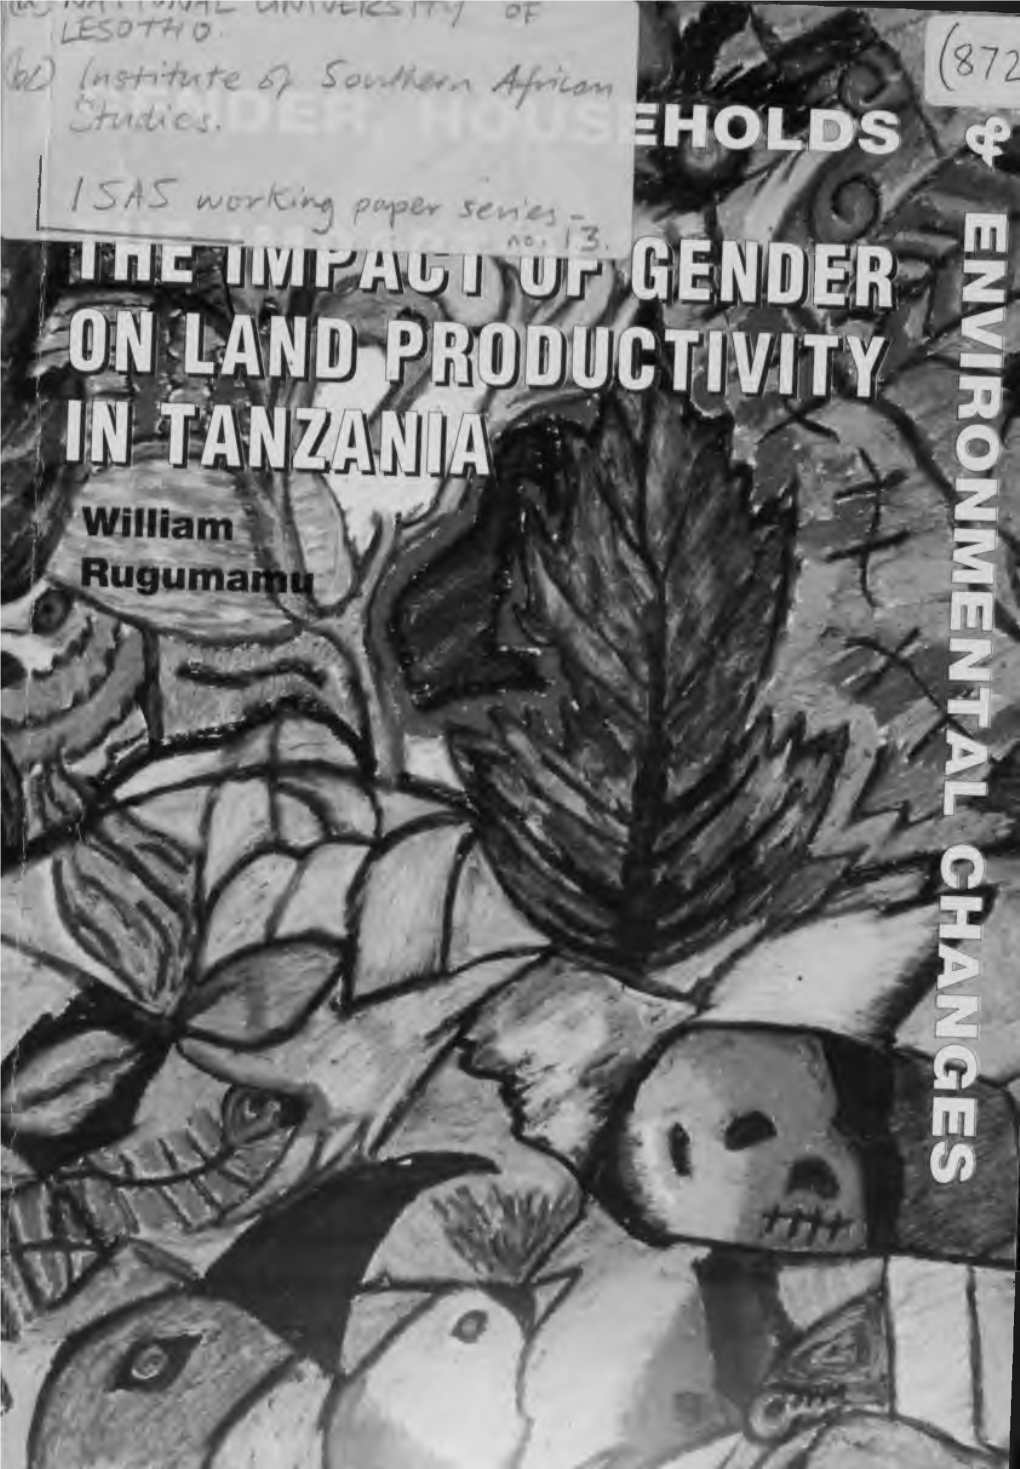 The Impact of Gender on Land Pro Ductivity in Tanzania